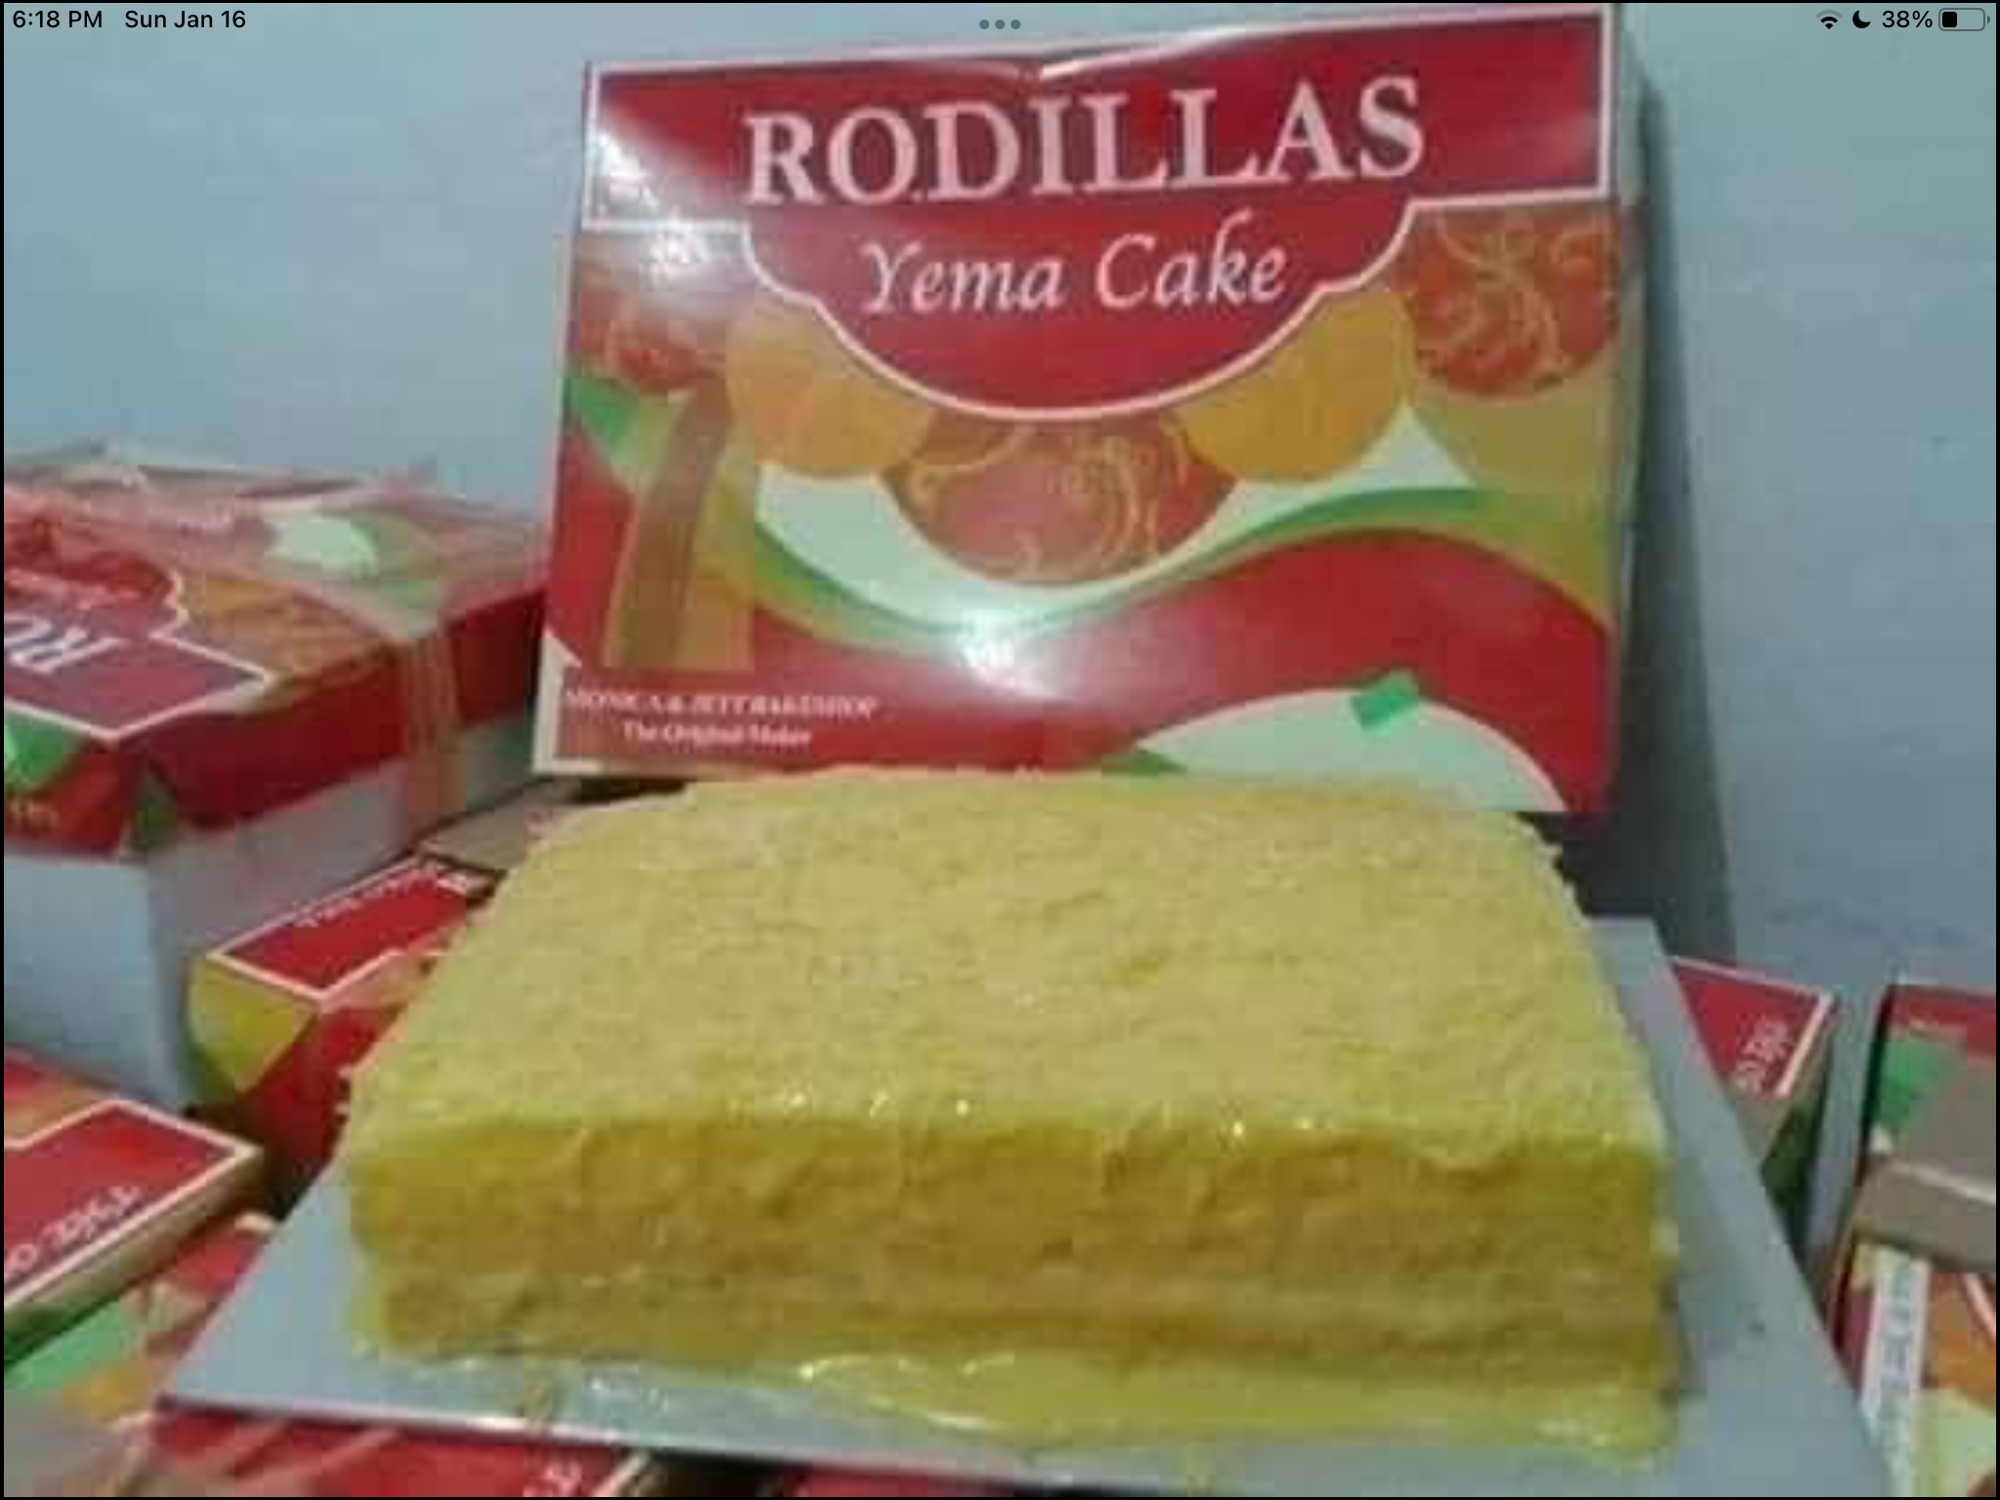 Remilly's Yema Cake (@remillysyemacake) • Instagram photos and videos